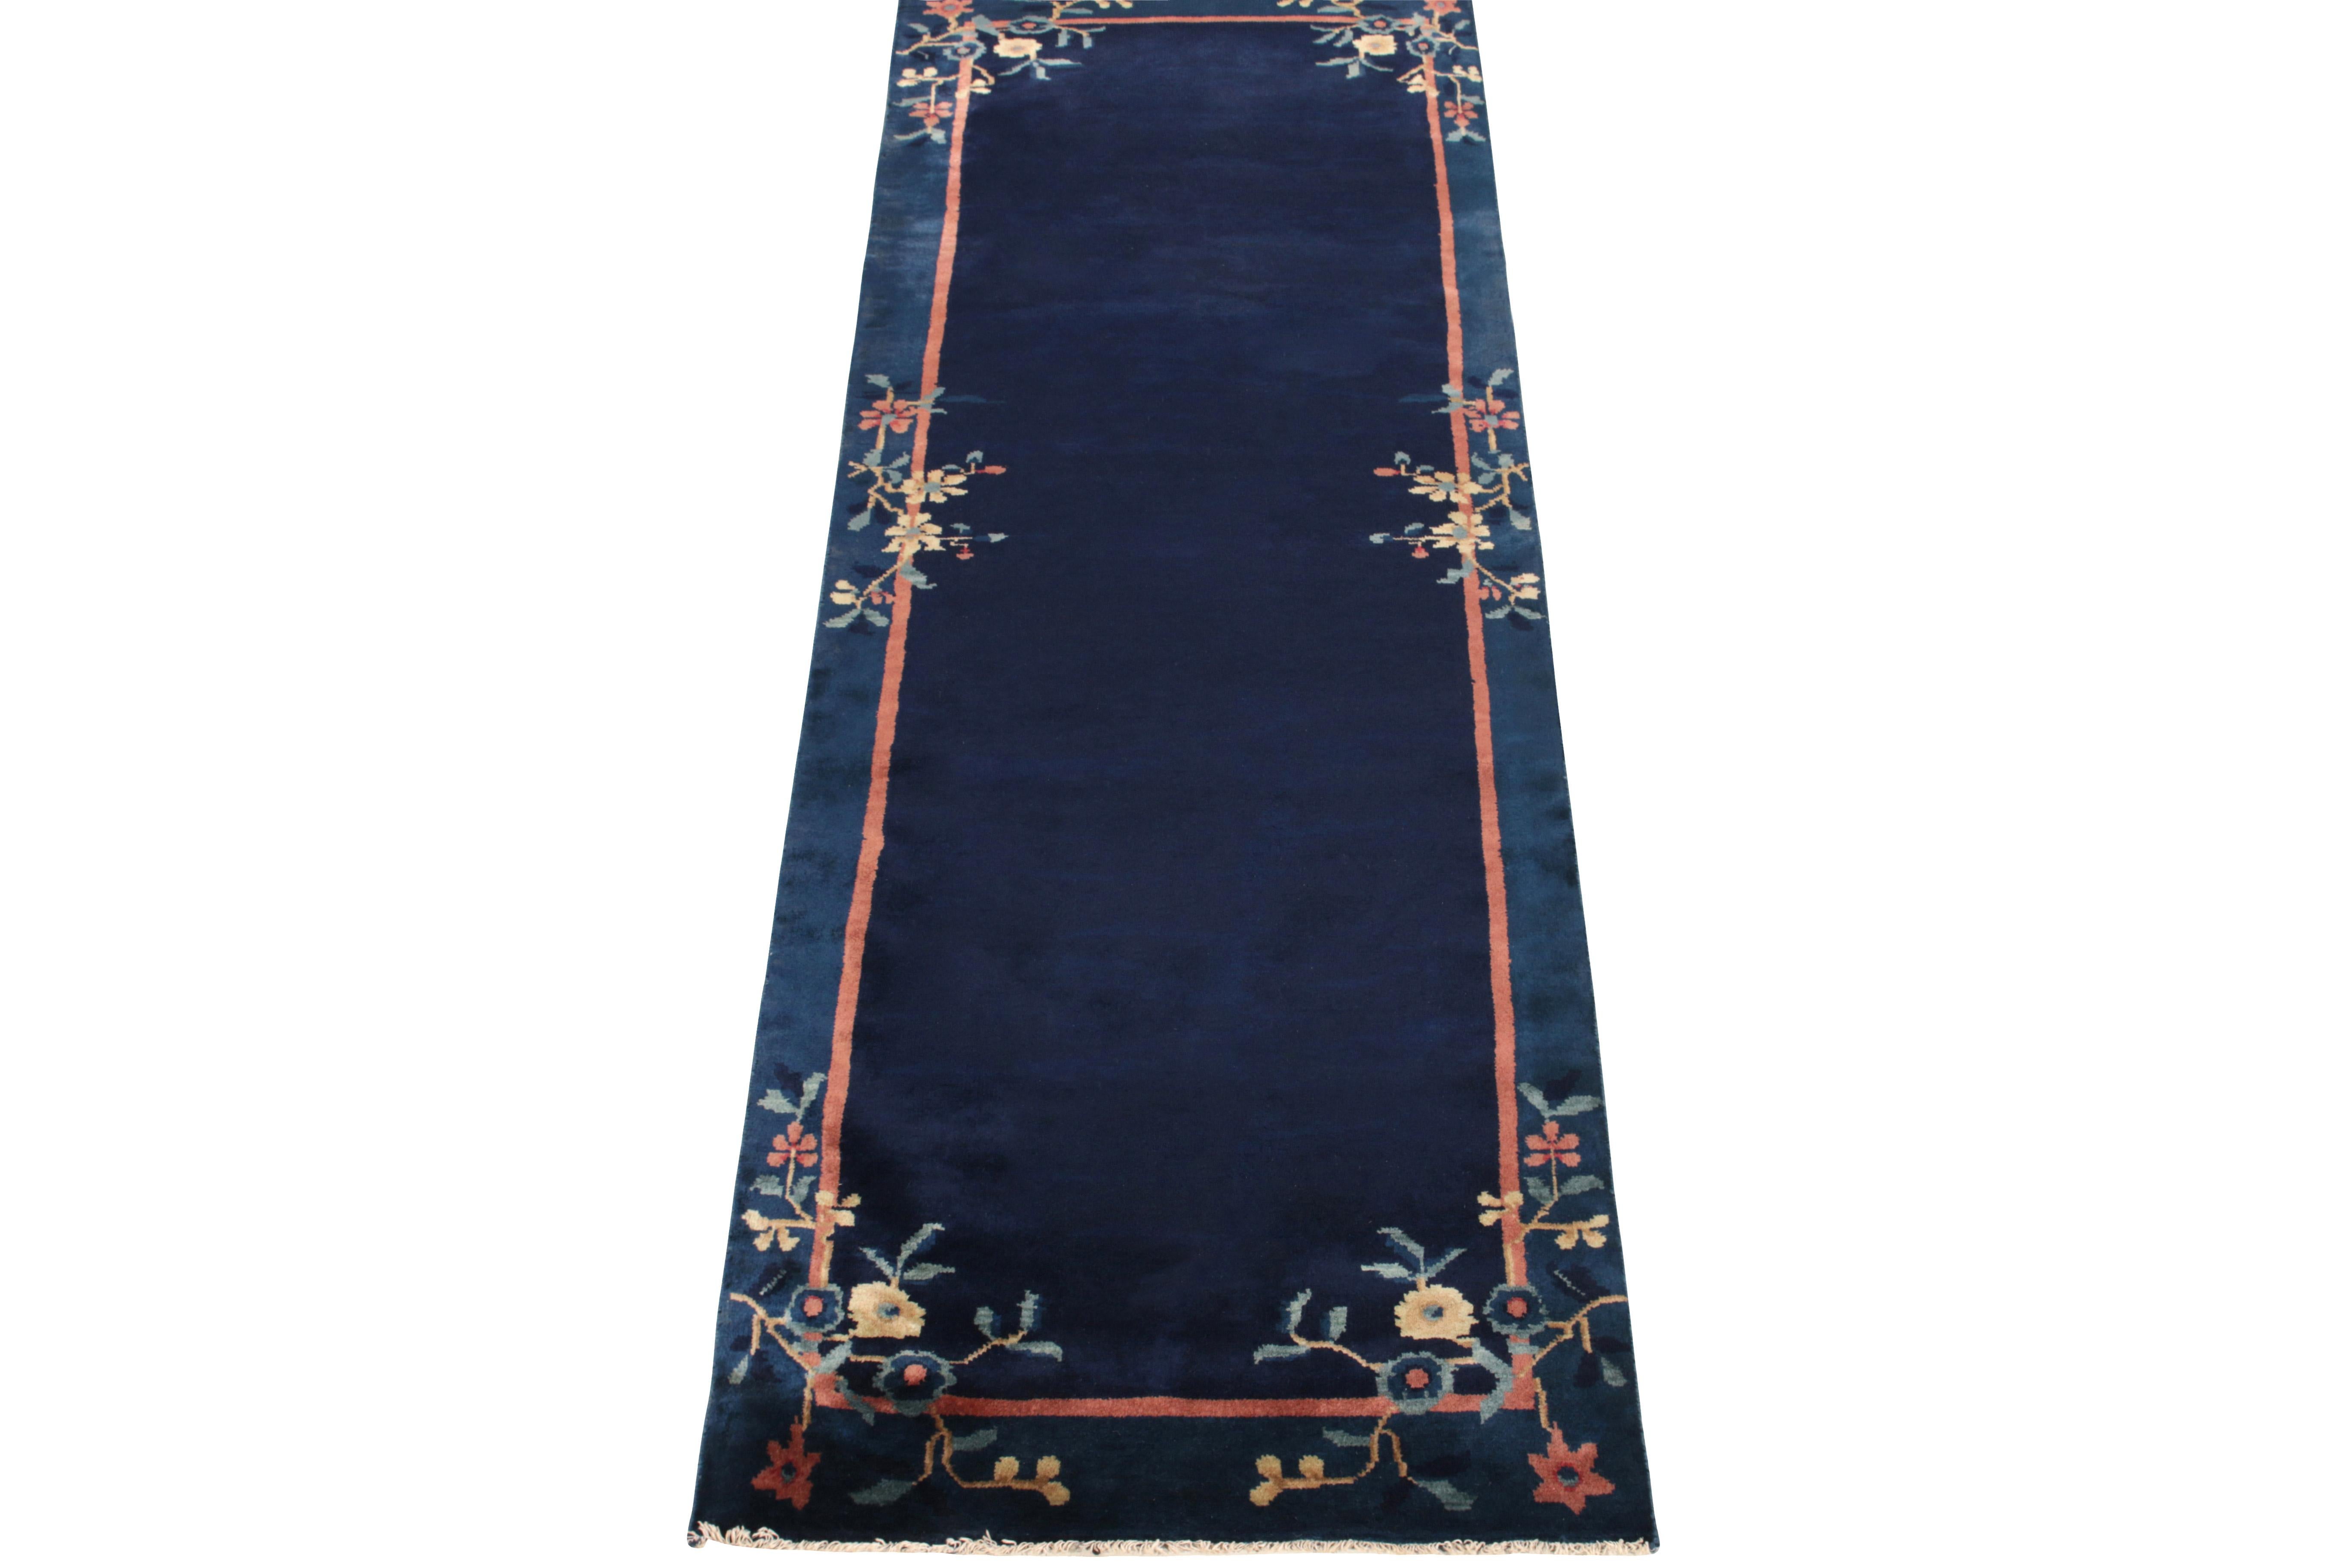 Boasting a floral pattern in yellow, red & sky blue tones in the outer border, a Chinese Deco style vintage runner observing light-dark spots in blue tones connoting a very classic appeal of the 1920s. Further enjoying a fine light red border